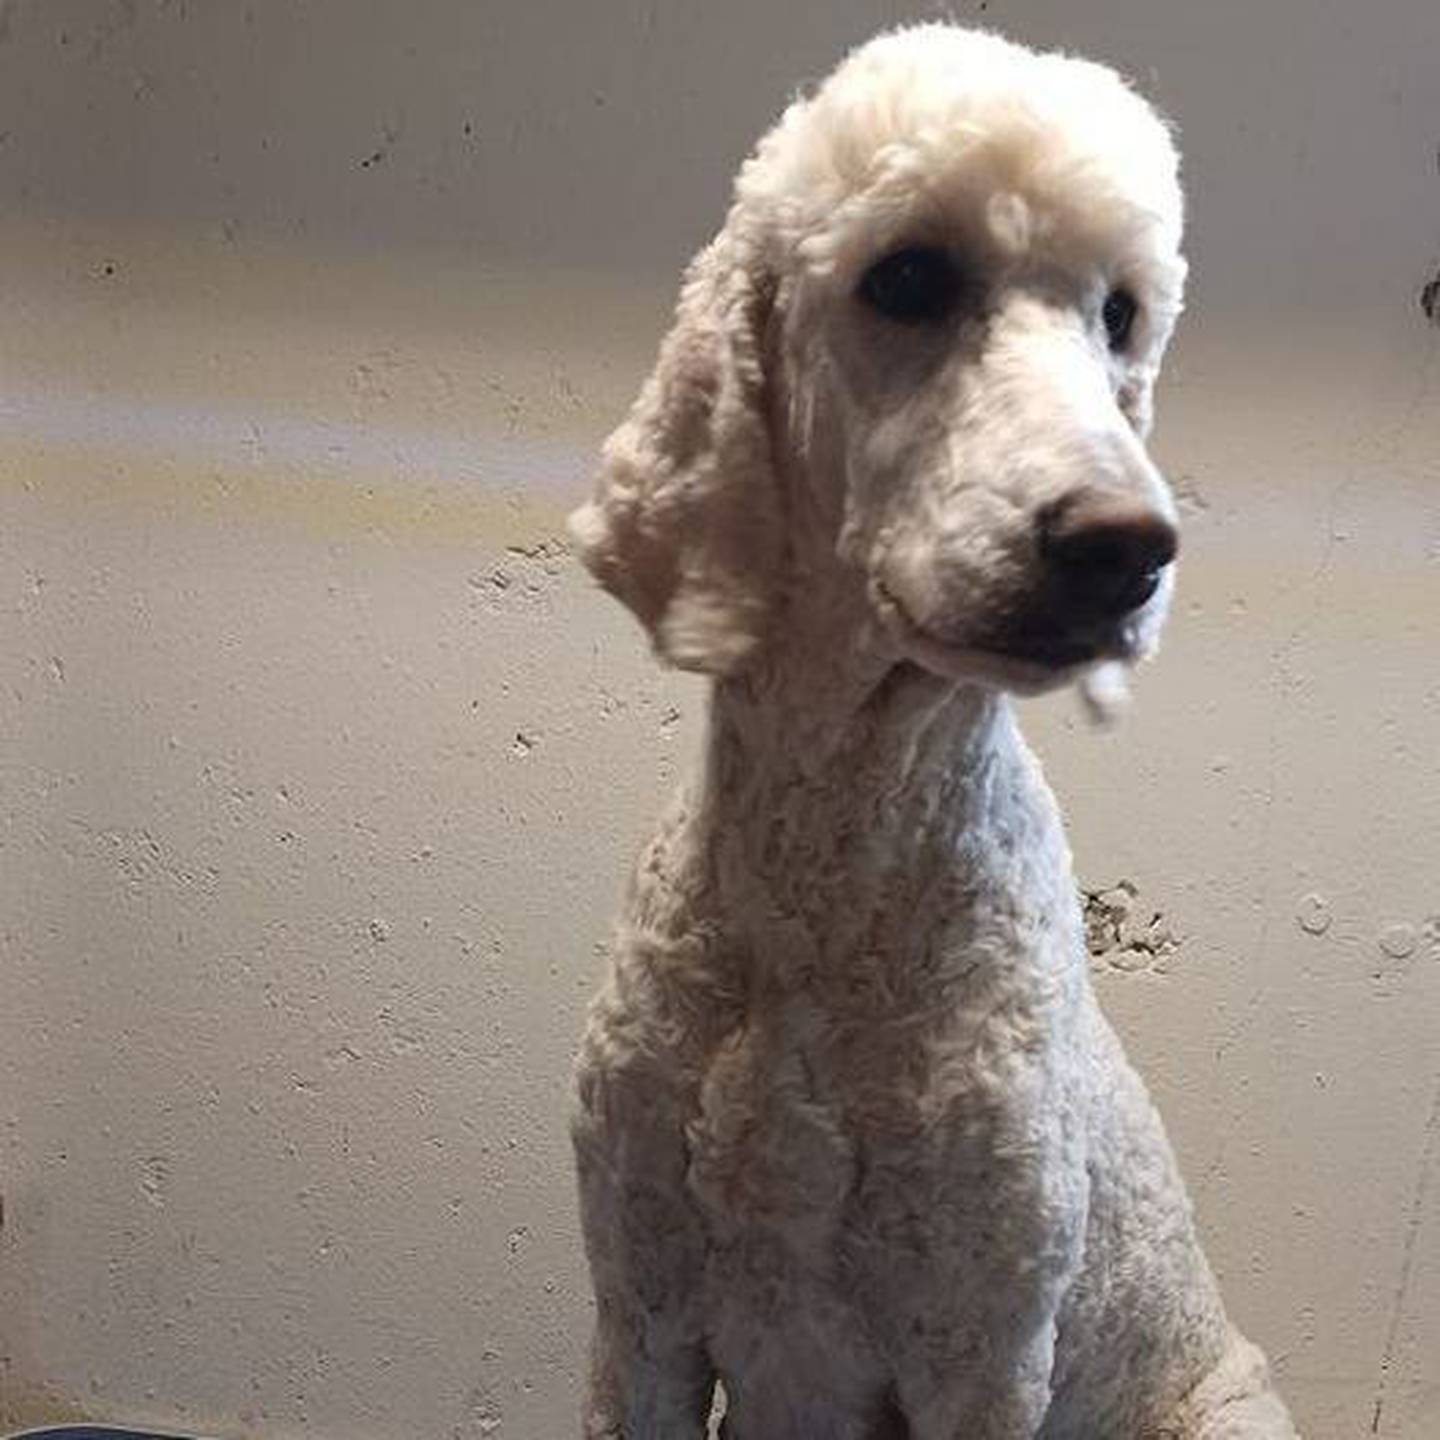 Livia is a 3-year-old poodle. She is friendly, affectionate, and loyal. She gets along with other dogs and children. For more information on Livia, including adoption fees please visit justanimals.org or call 815-448-2510.